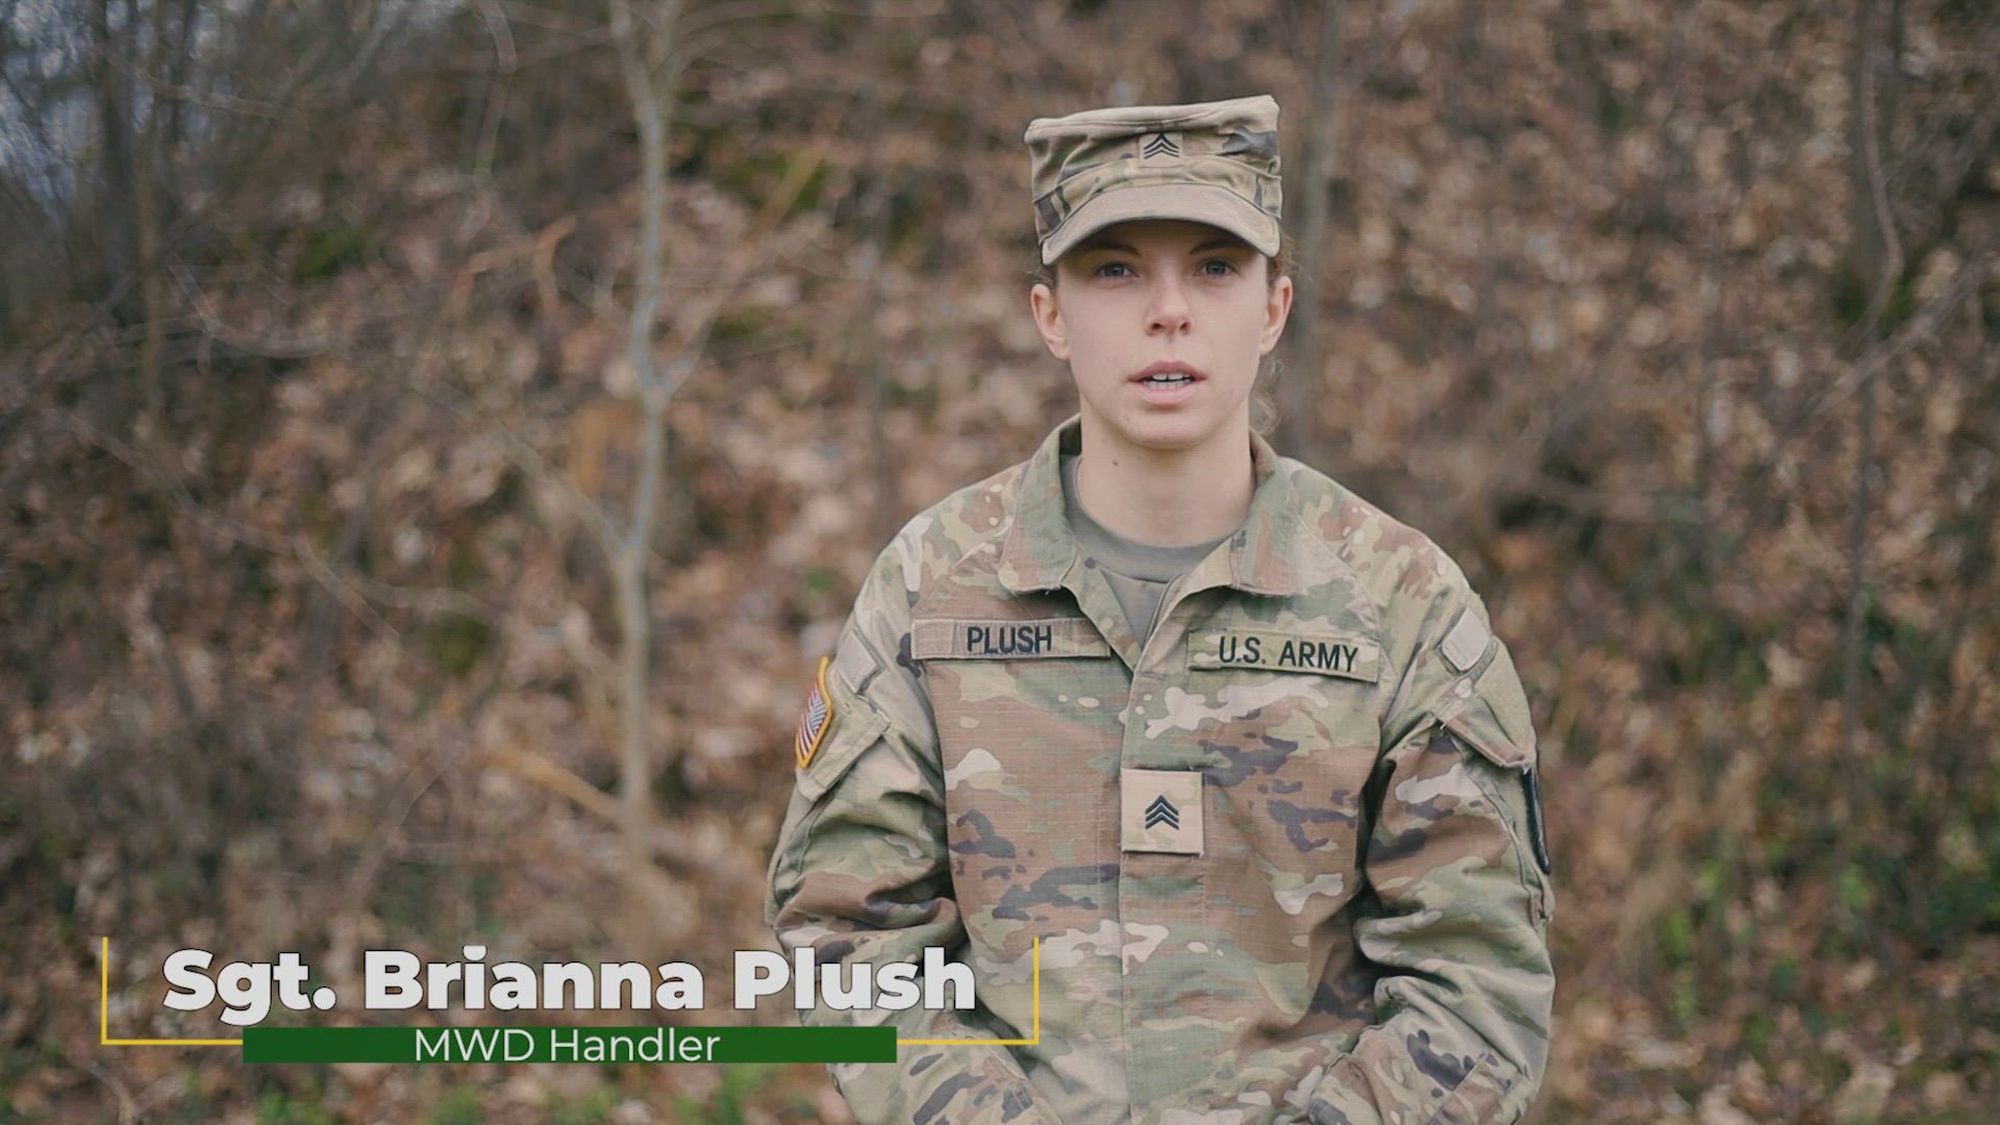 Sgt. Brianna Plush, a military working dog handler from 131st Military Police Detachment, Combined Military Working Dogs Detachment Europe, 18th Military Police Brigade, talks about the values of the relationships between dog and handler.